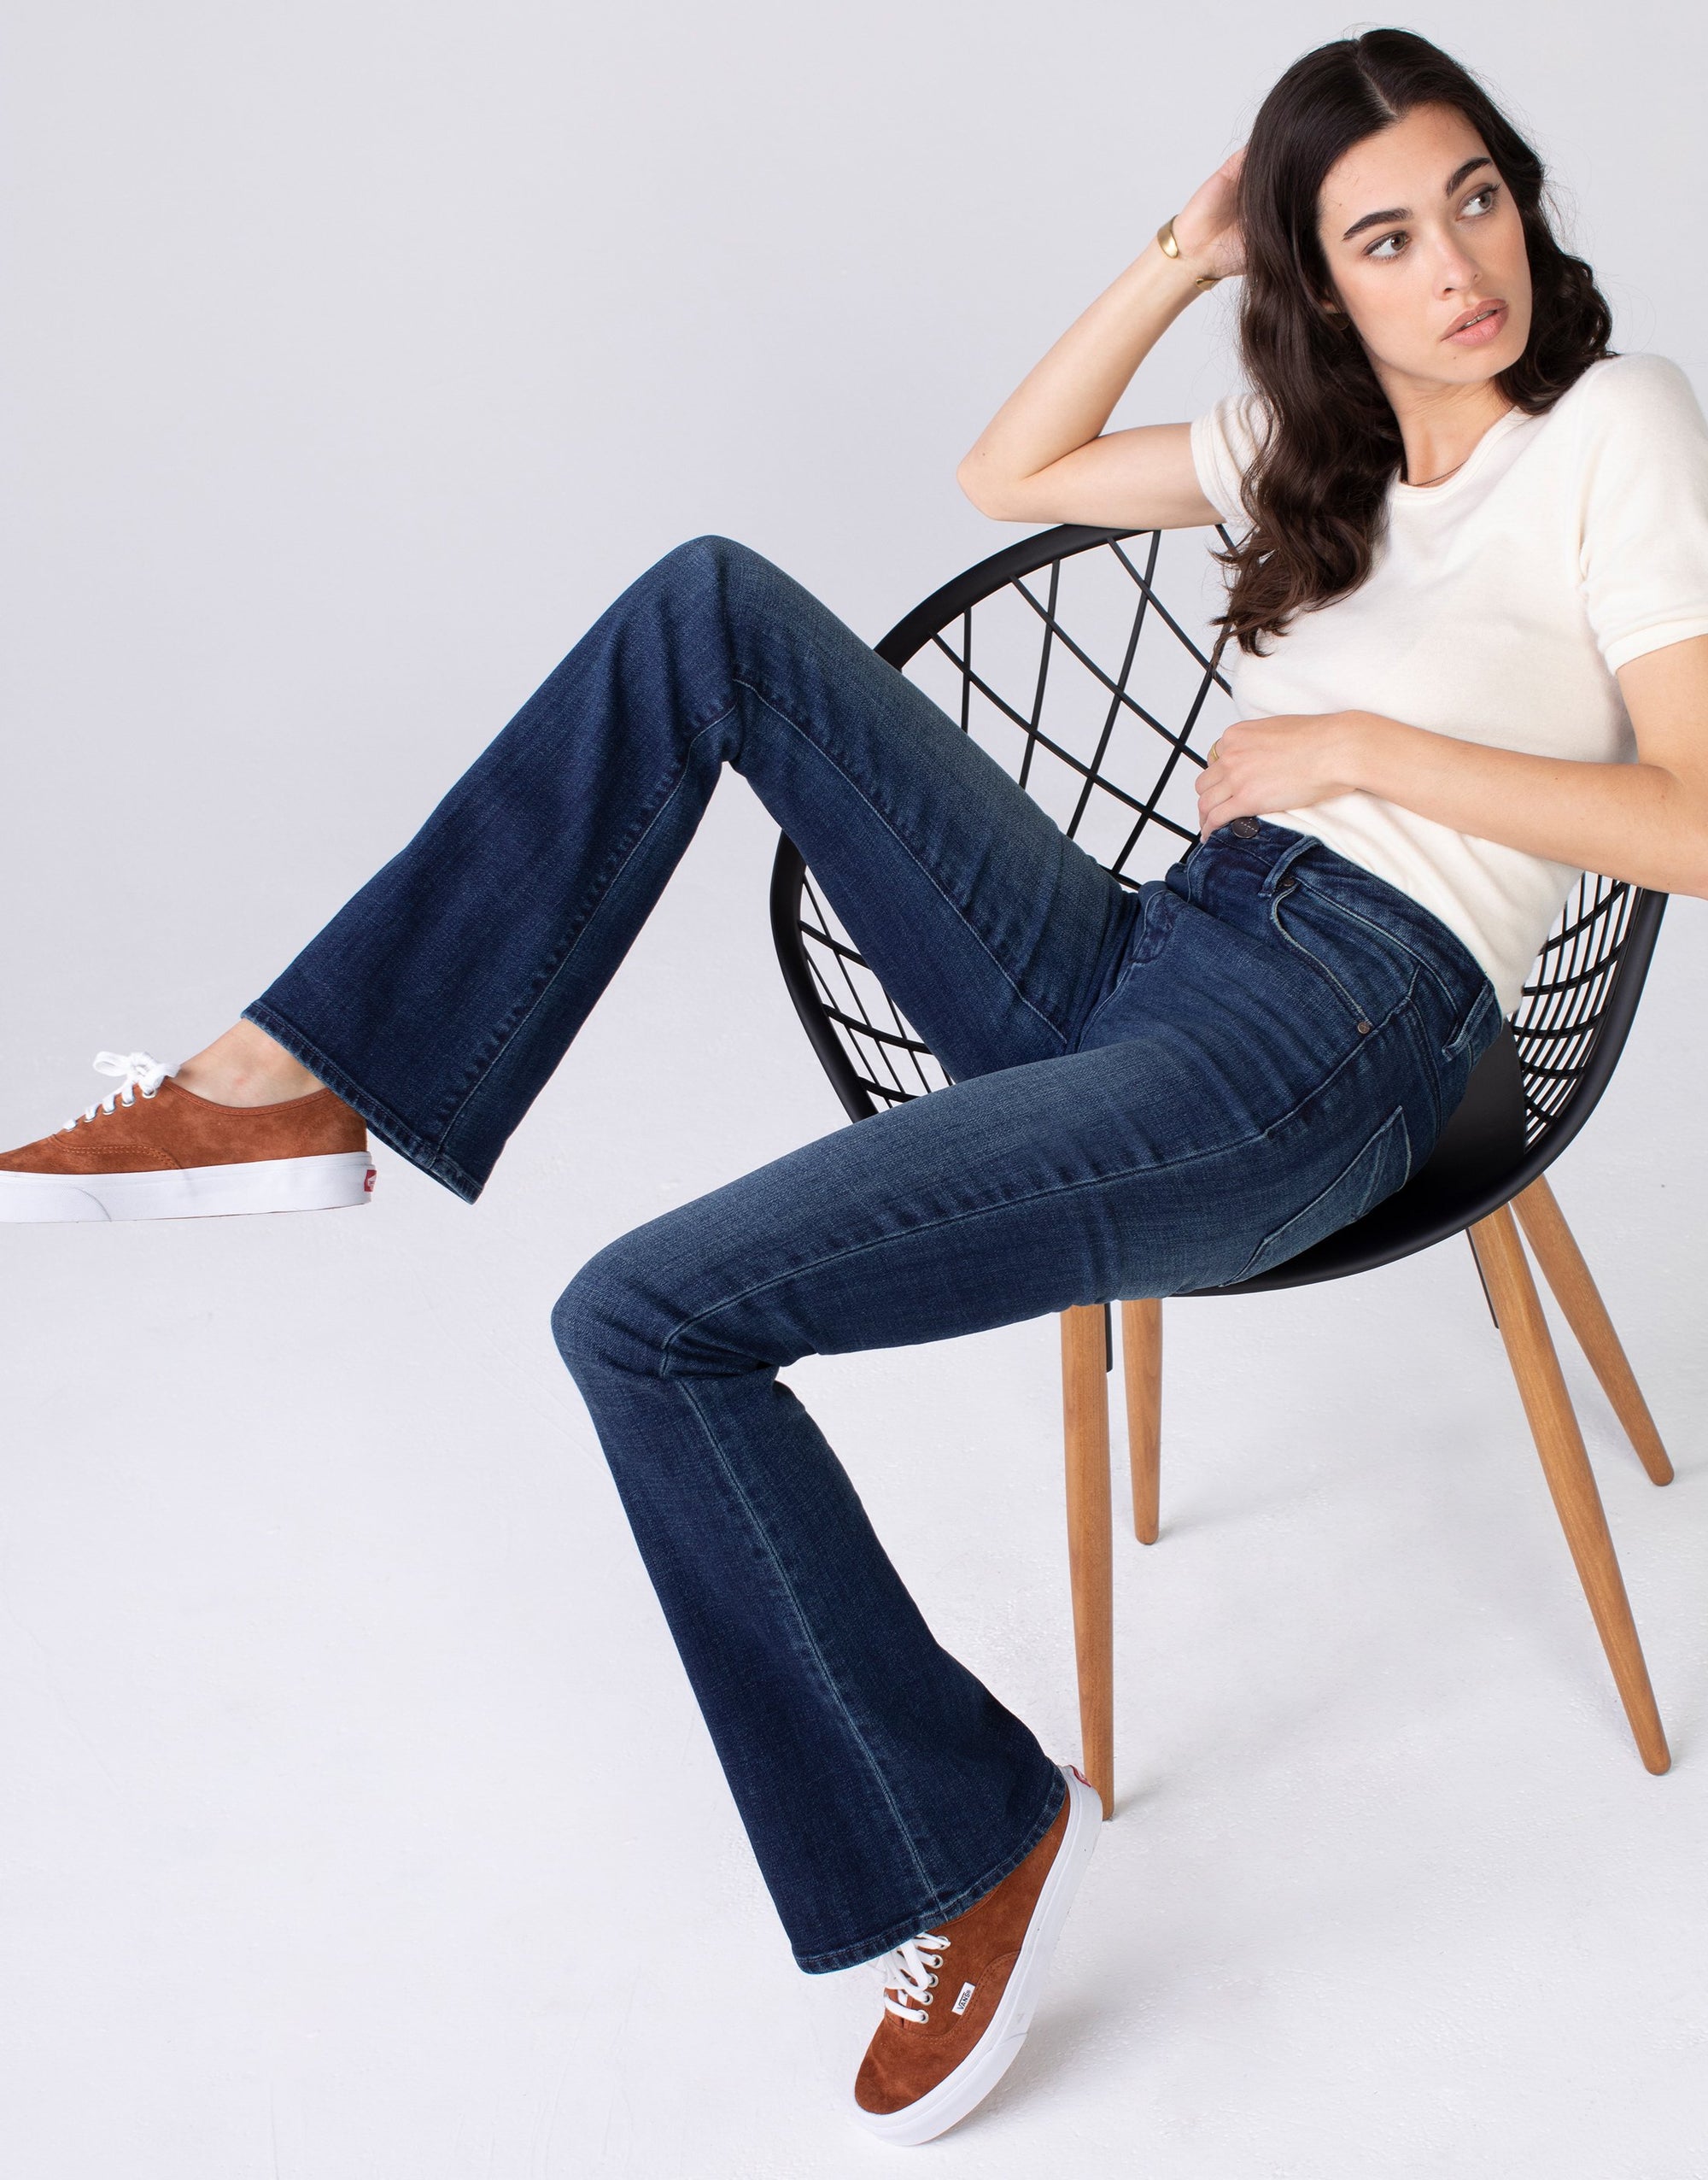 JAN High Rise Slim Flare in Ardent